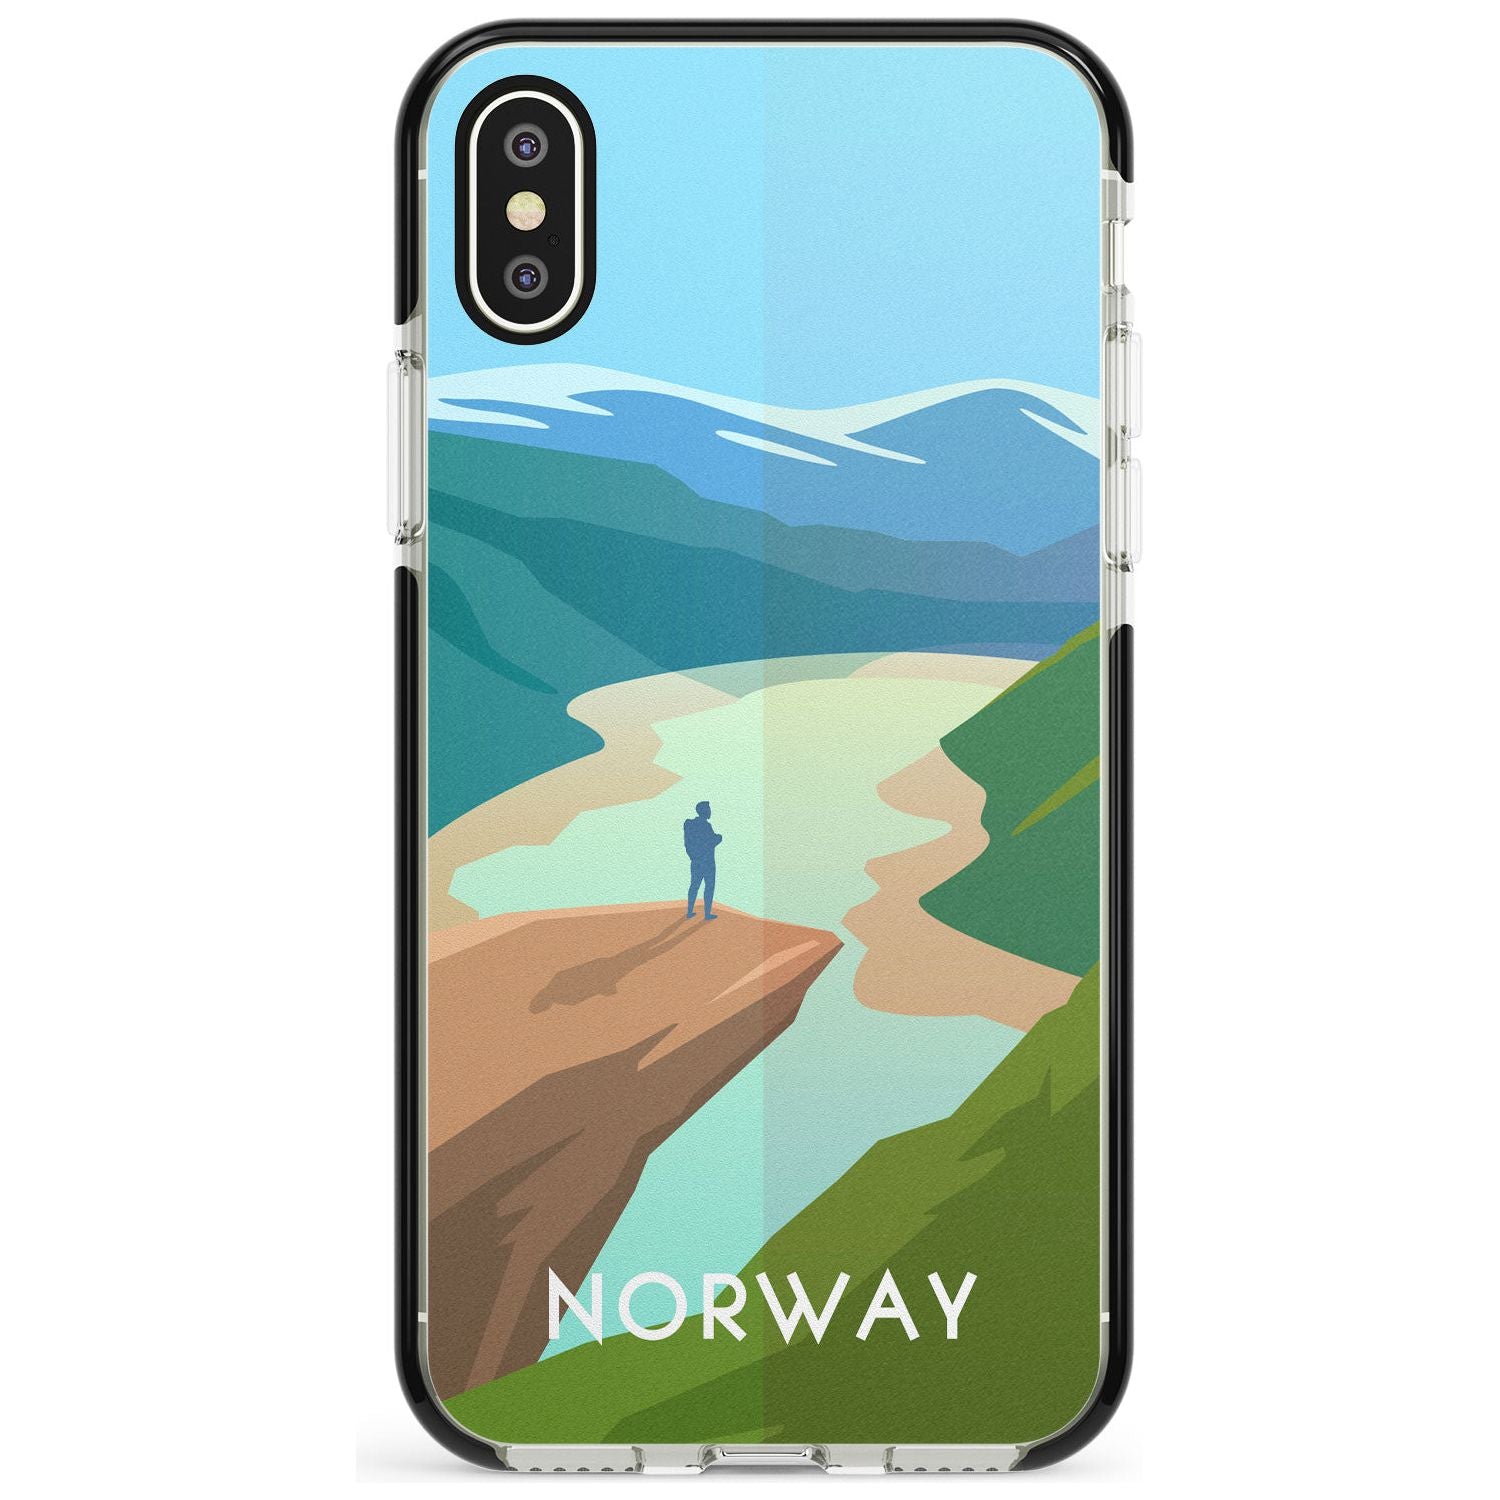 Vintage Travel Poster Norway Black Impact Phone Case for iPhone X XS Max XR